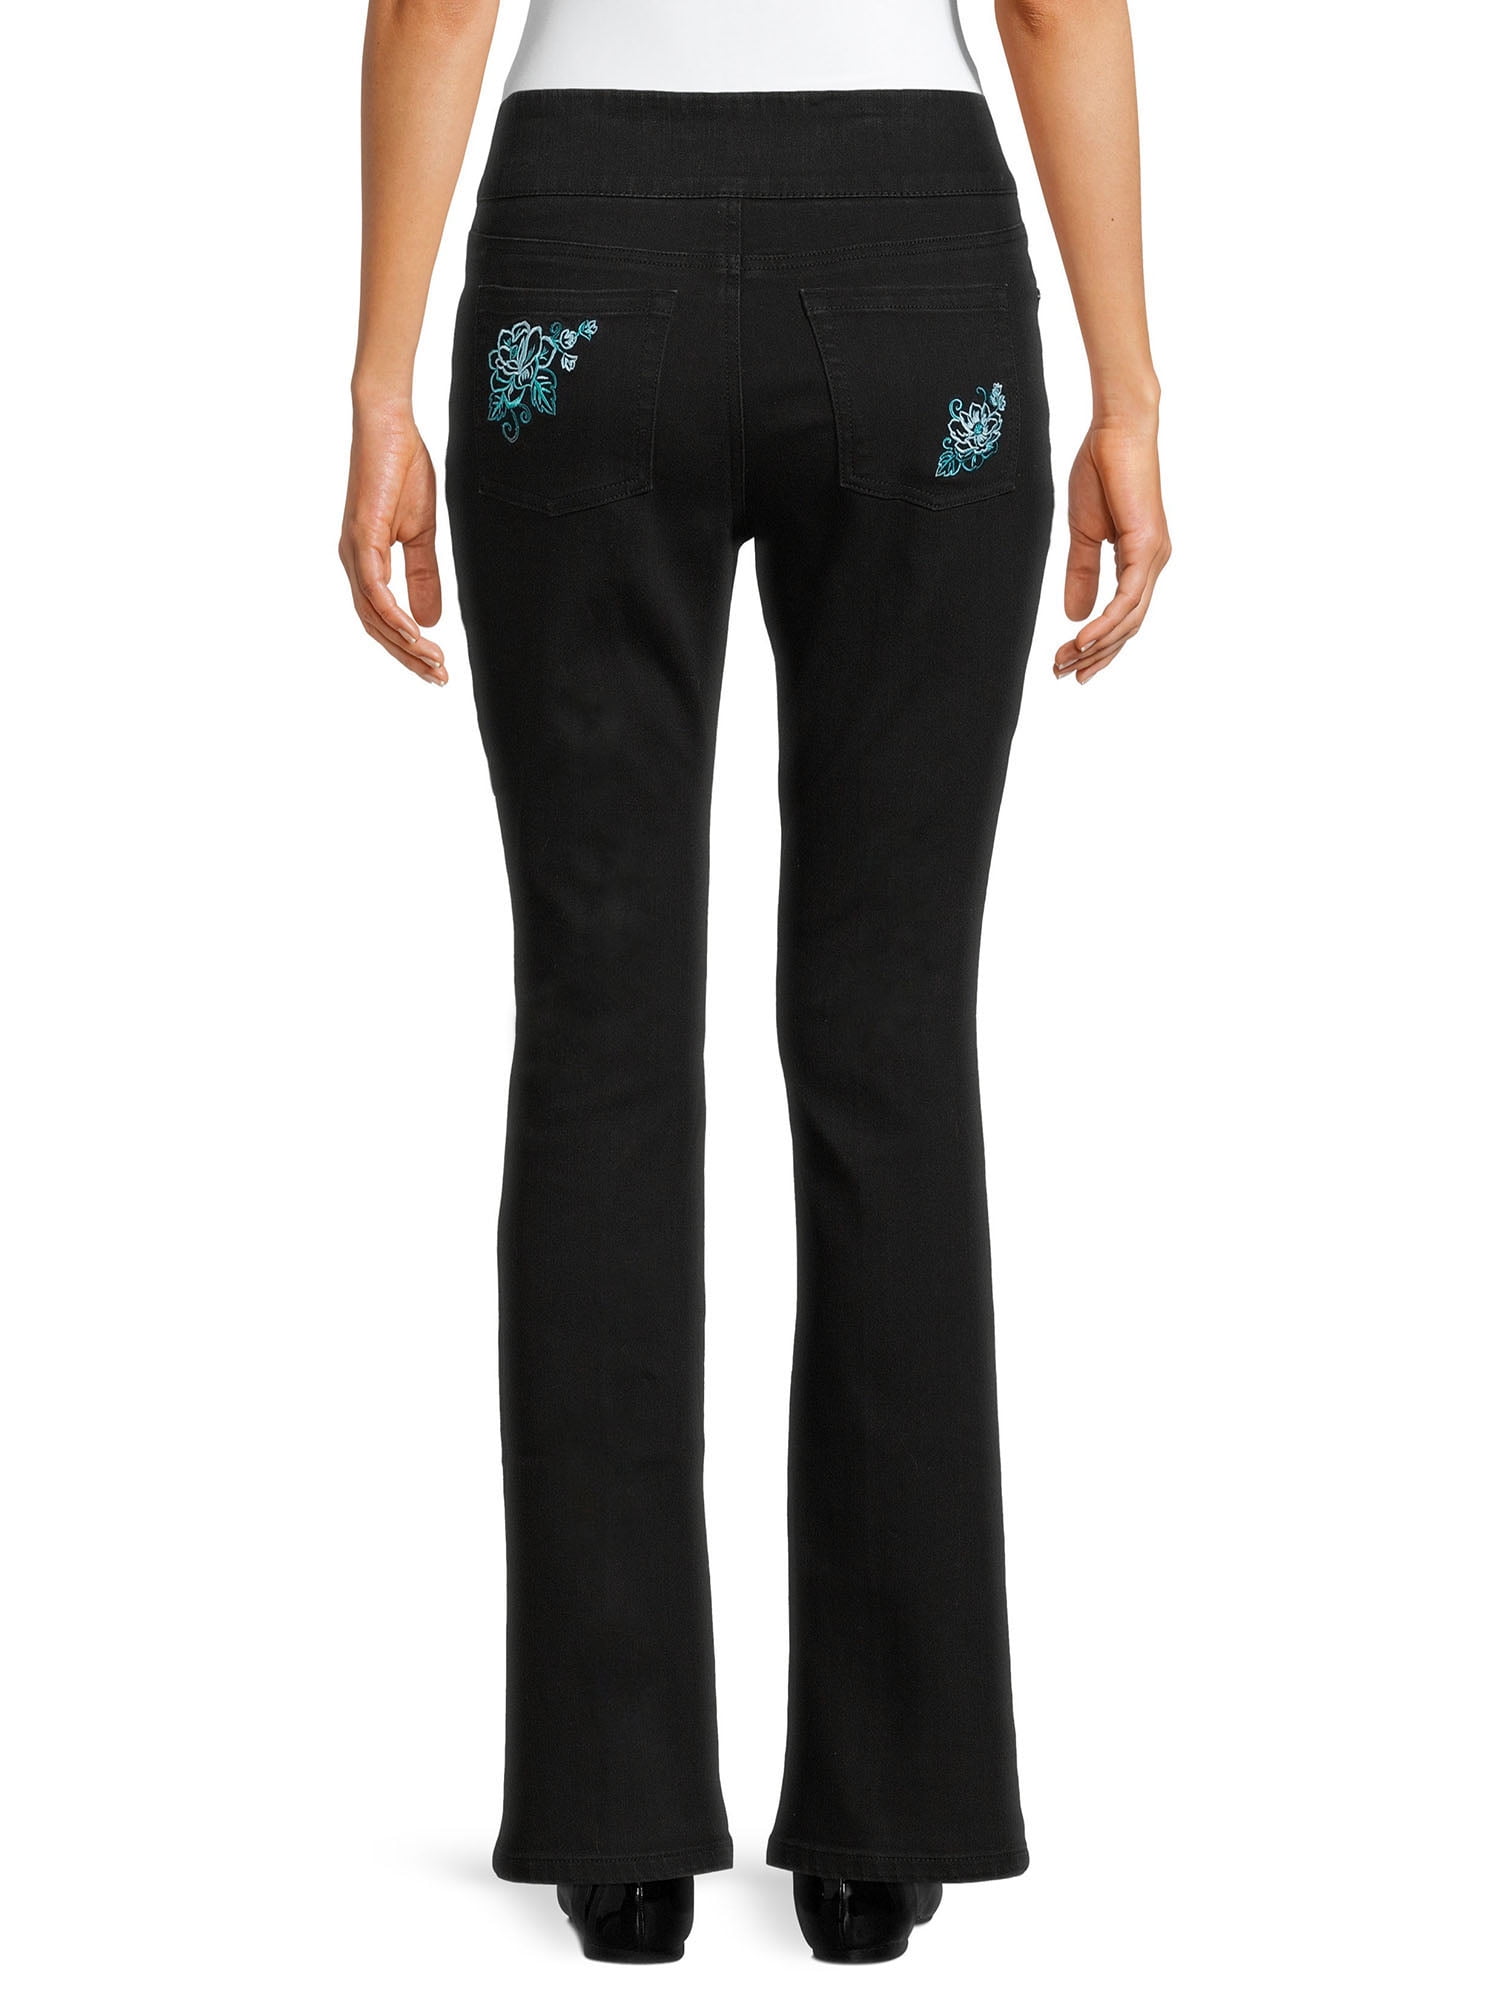 The Pioneer Woman Embroidered Pull on Jeggings 